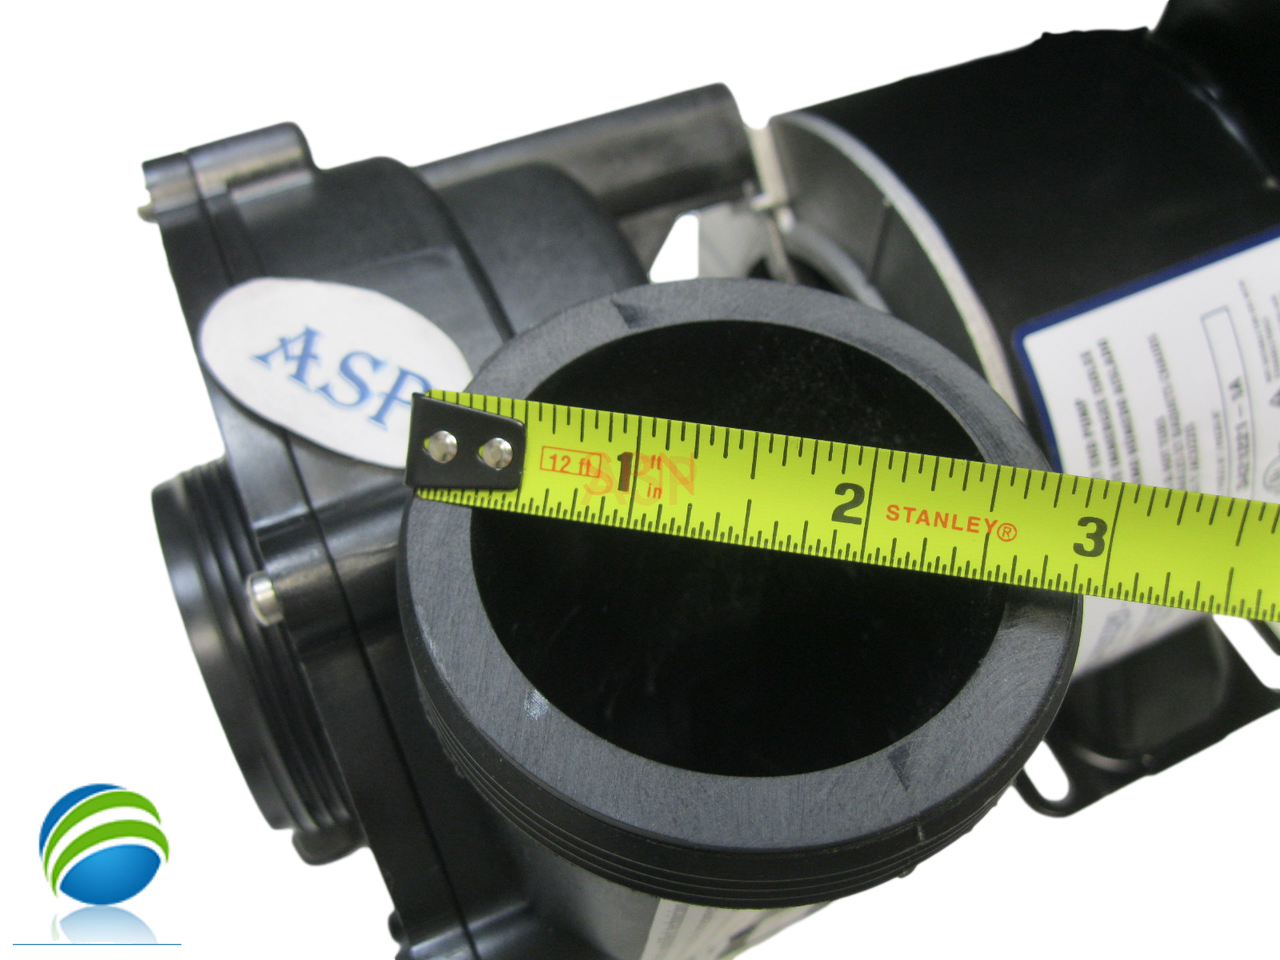 The inlet and outlet measures about 3" across the threads. 
Complete Pump, Aqua-Flo, XP2, 1.5HP, 230v, 48 frame, 2"x 2", 1 or 2 Speed